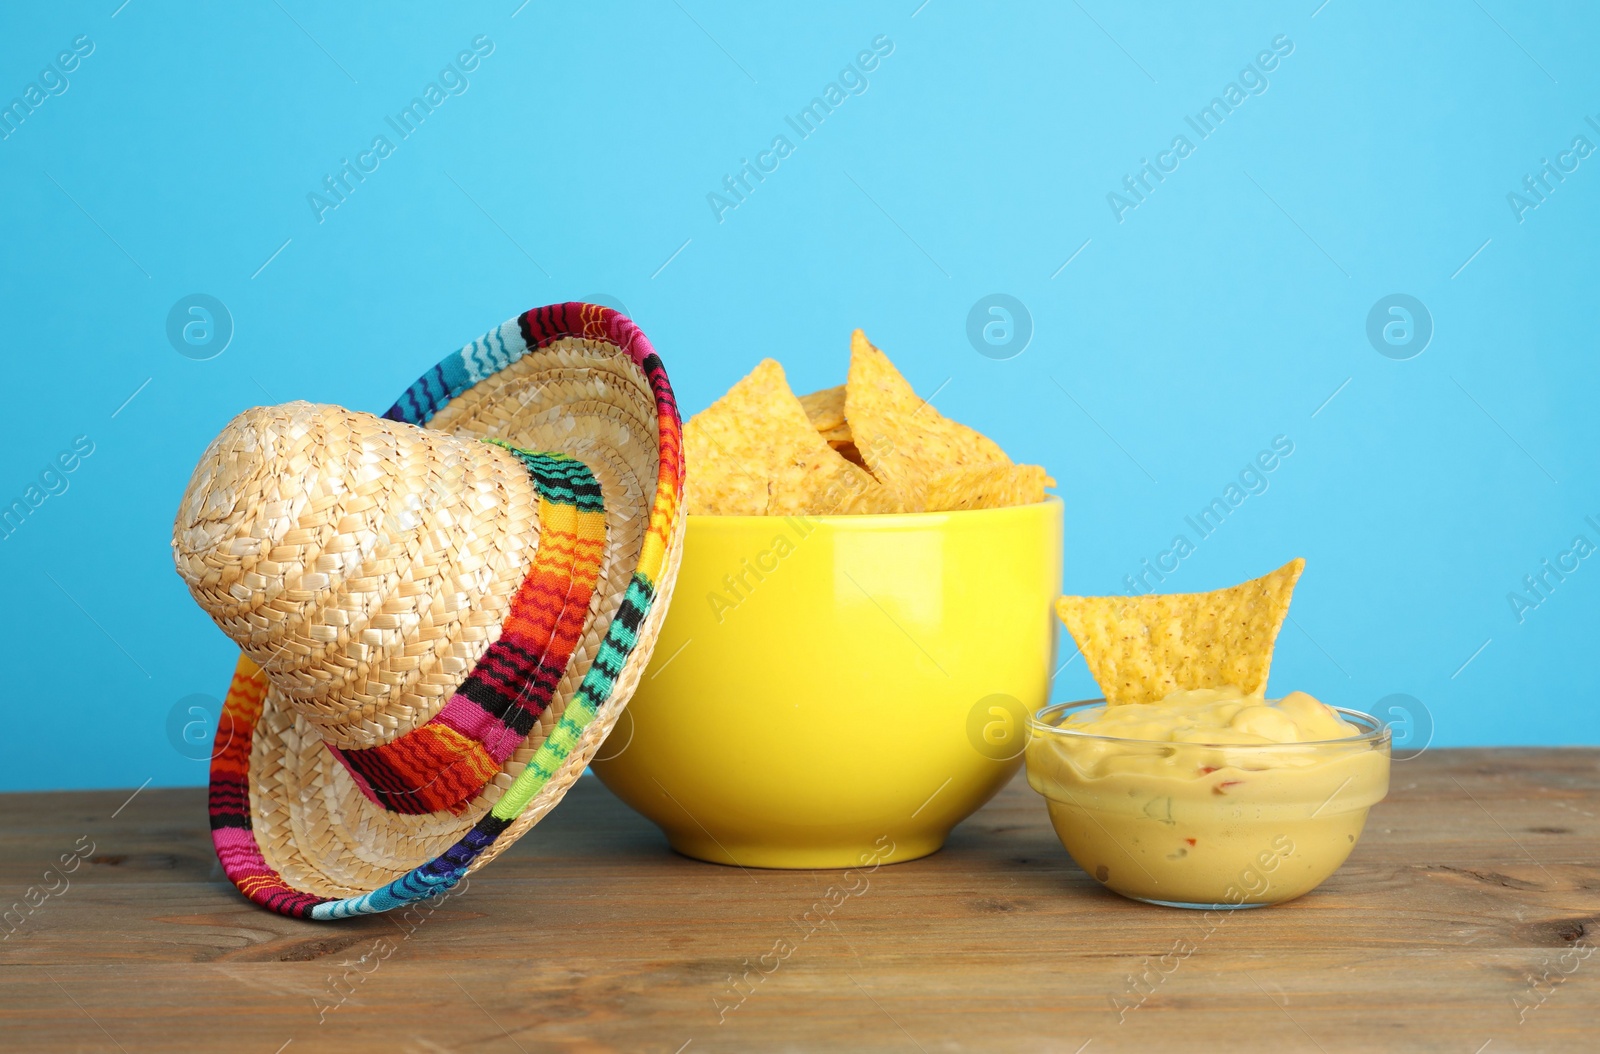 Photo of Mexican sombrero hat, nachos chips and guacamole on wooden table against light blue background